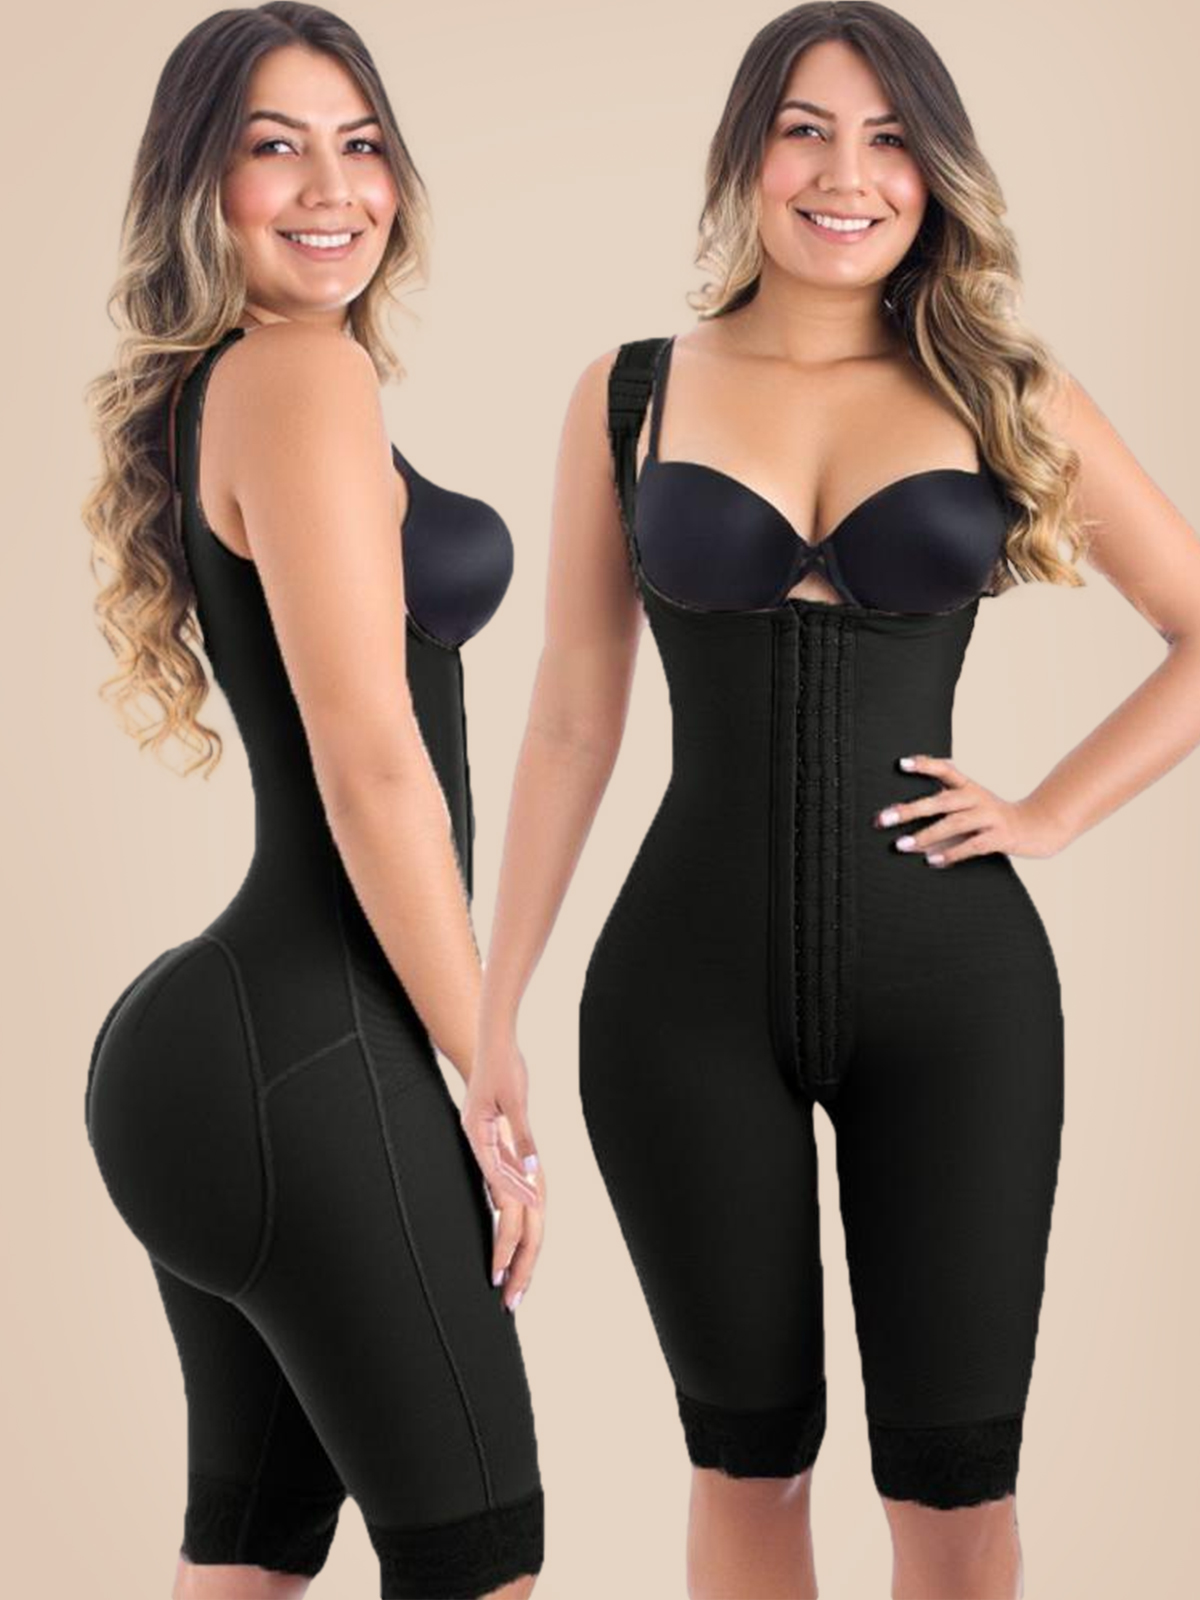 Mehrang Skin fit Body Shapers For Womens and Women Body Shapewear at Rs 399, Ladies Body Shaper